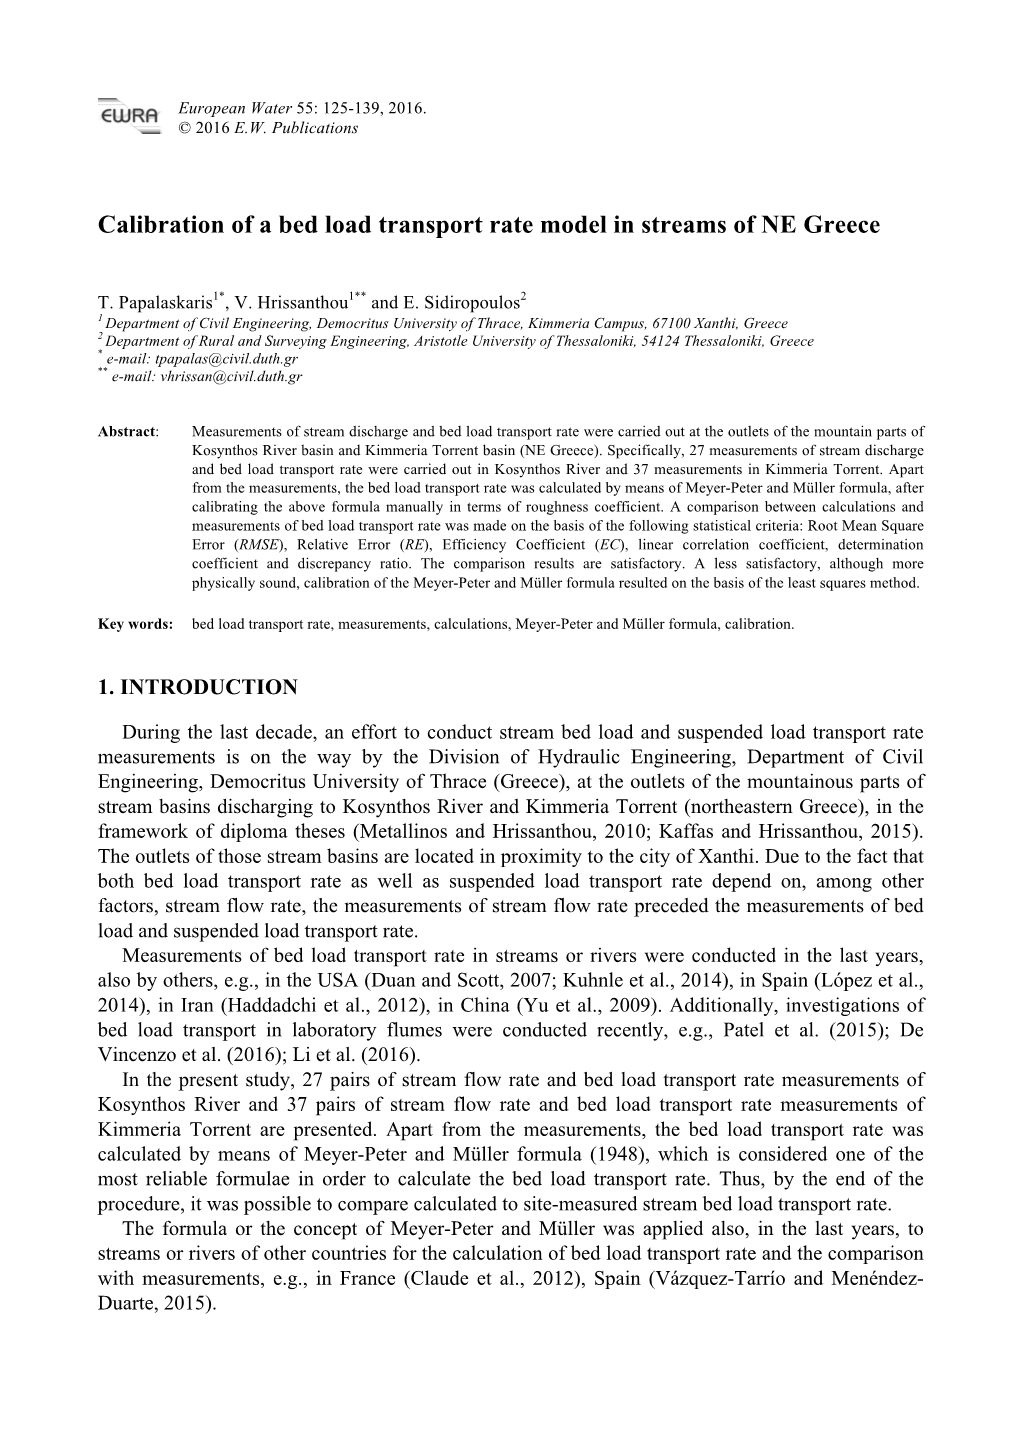 Calibration of a Bed Load Transport Rate Model in Streams of NE Greece